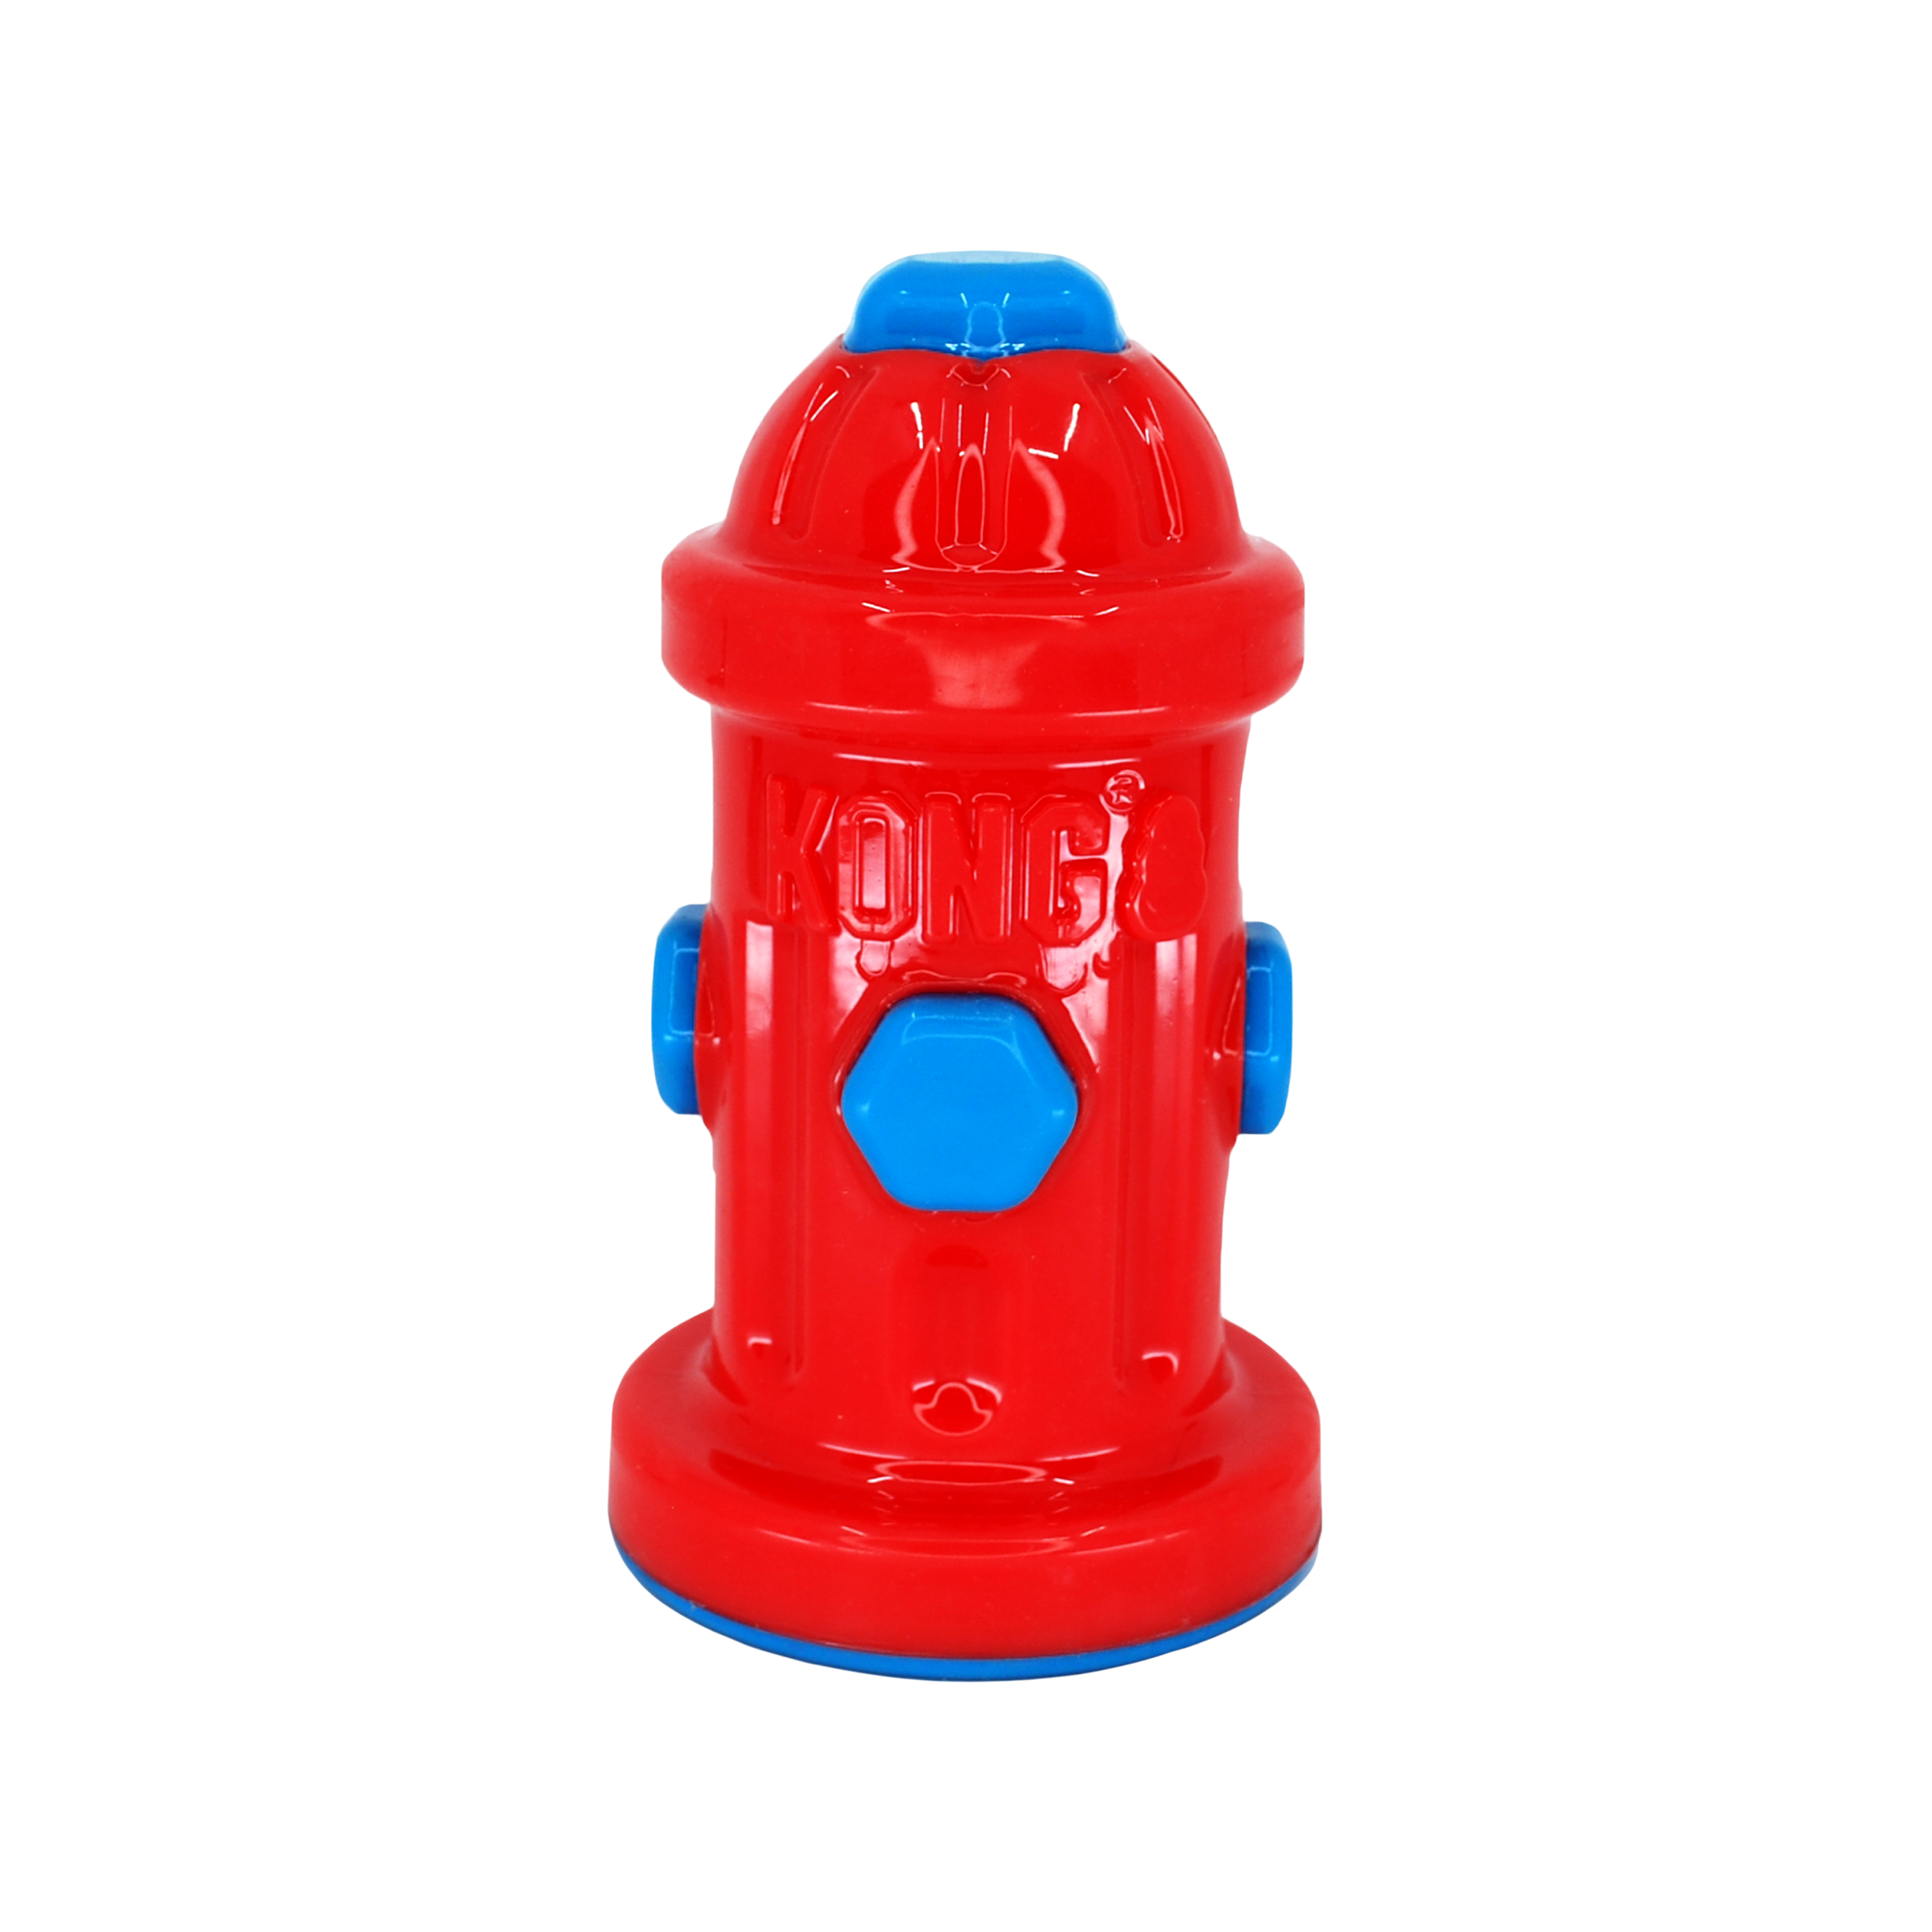 Eon Fire Hydrant offpack product image